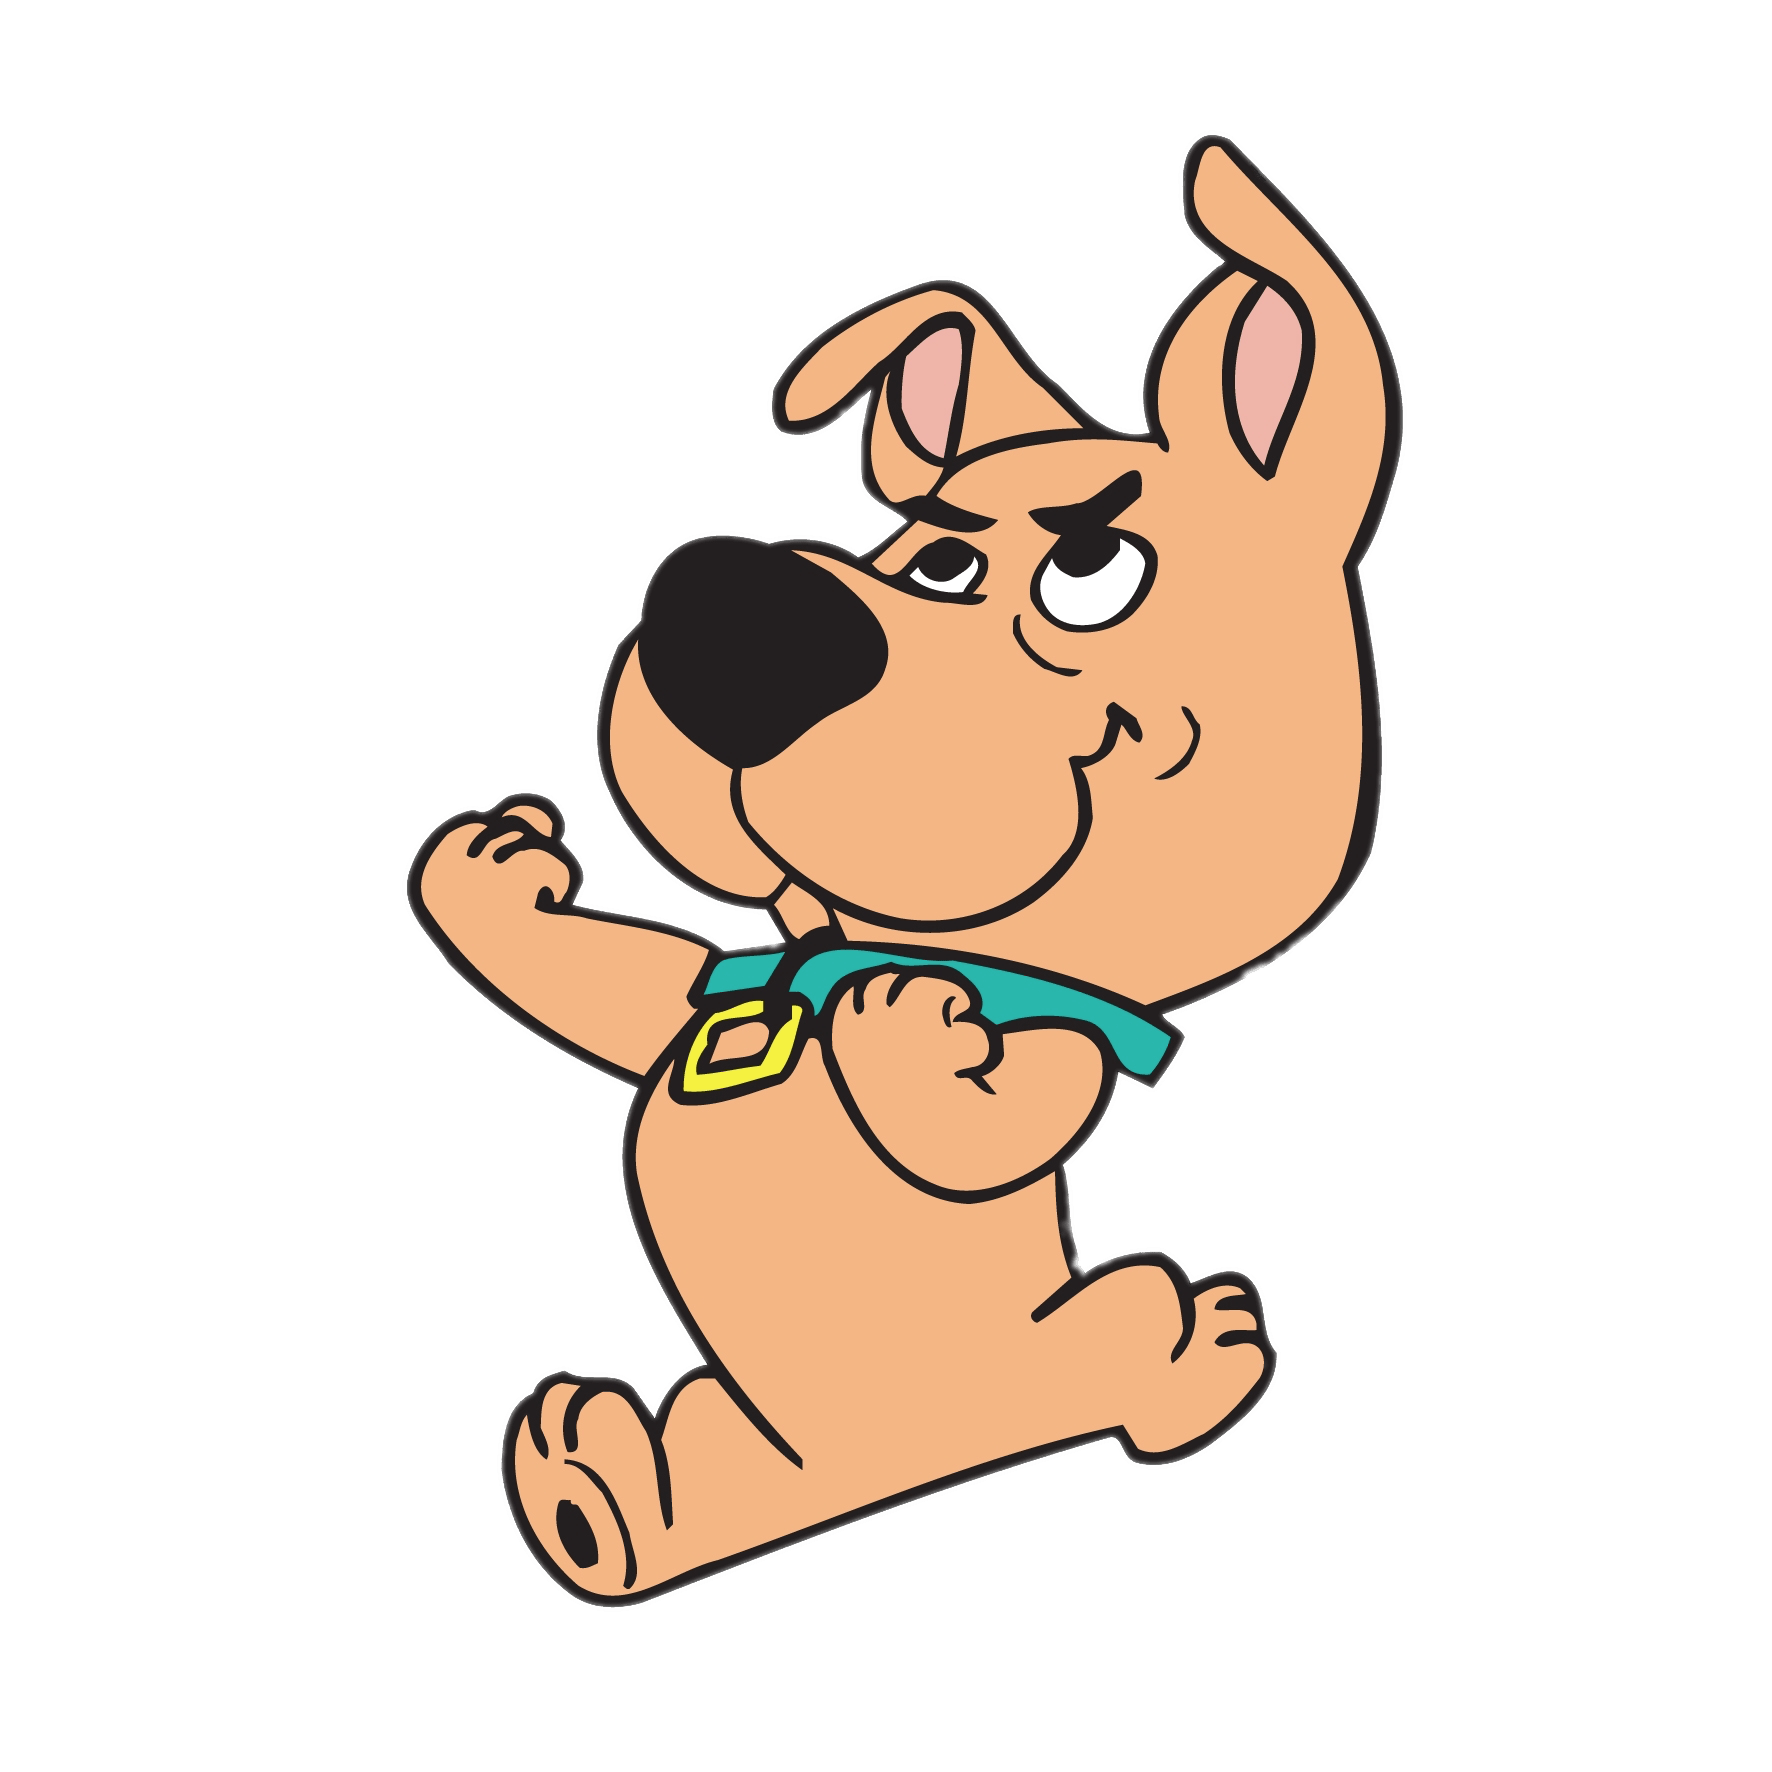 Scrappy Doo Background Image PNG